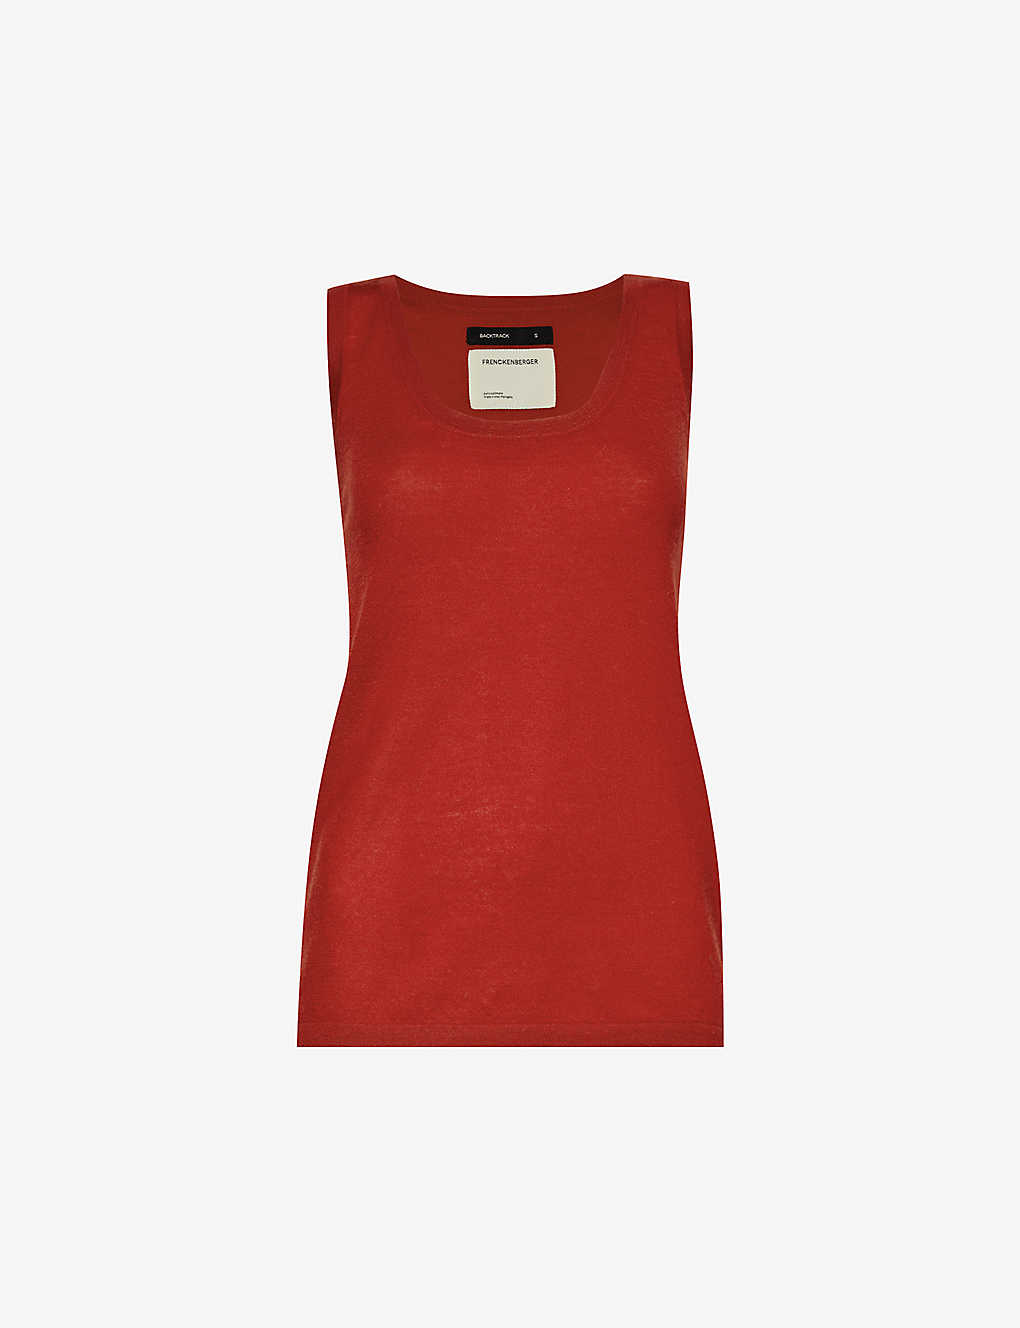 Shop Frenckenberger Women's Red Relaxed-fit Scoop-neck Cashmere Knitted Top